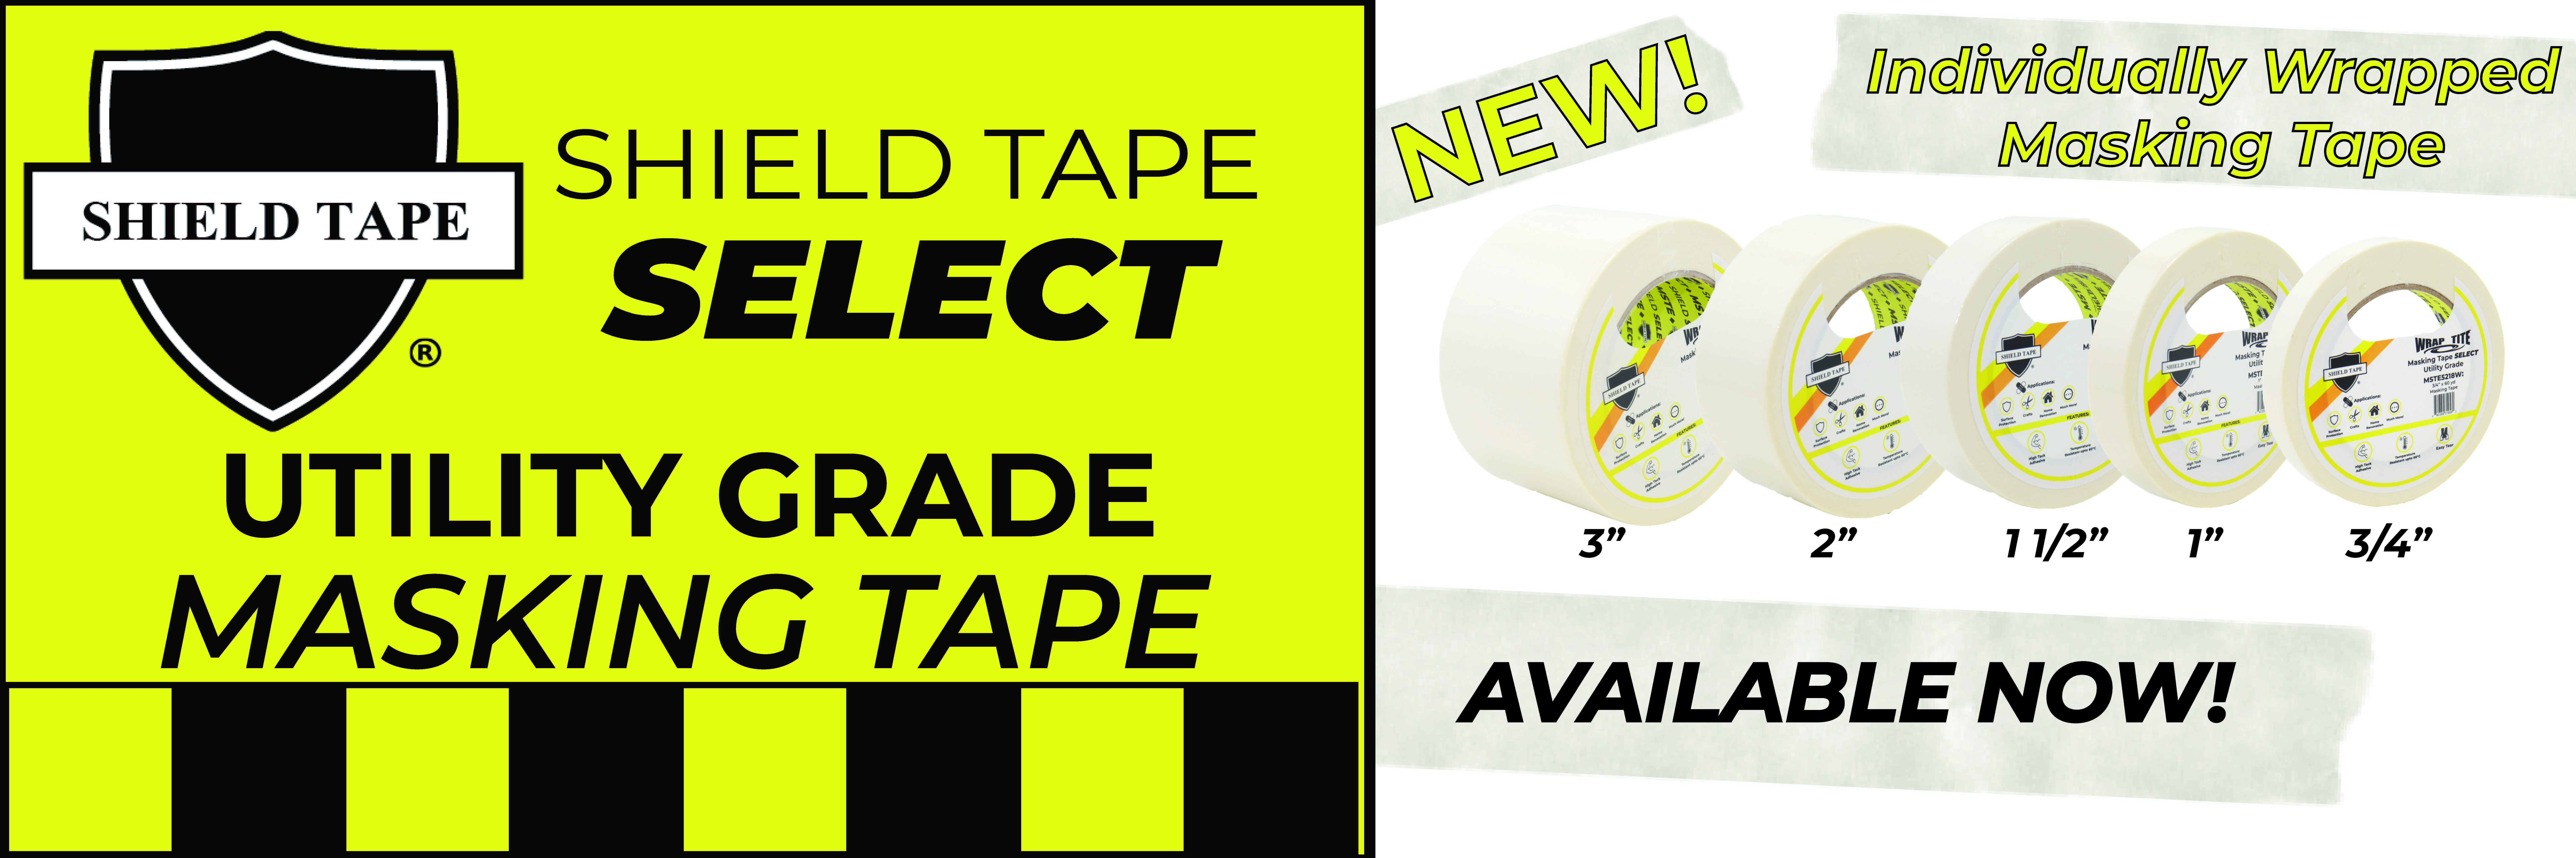 Shield Tape Select - Utility Masking Tape from Wrap-Tite | Individually Wrapped Masking Tape